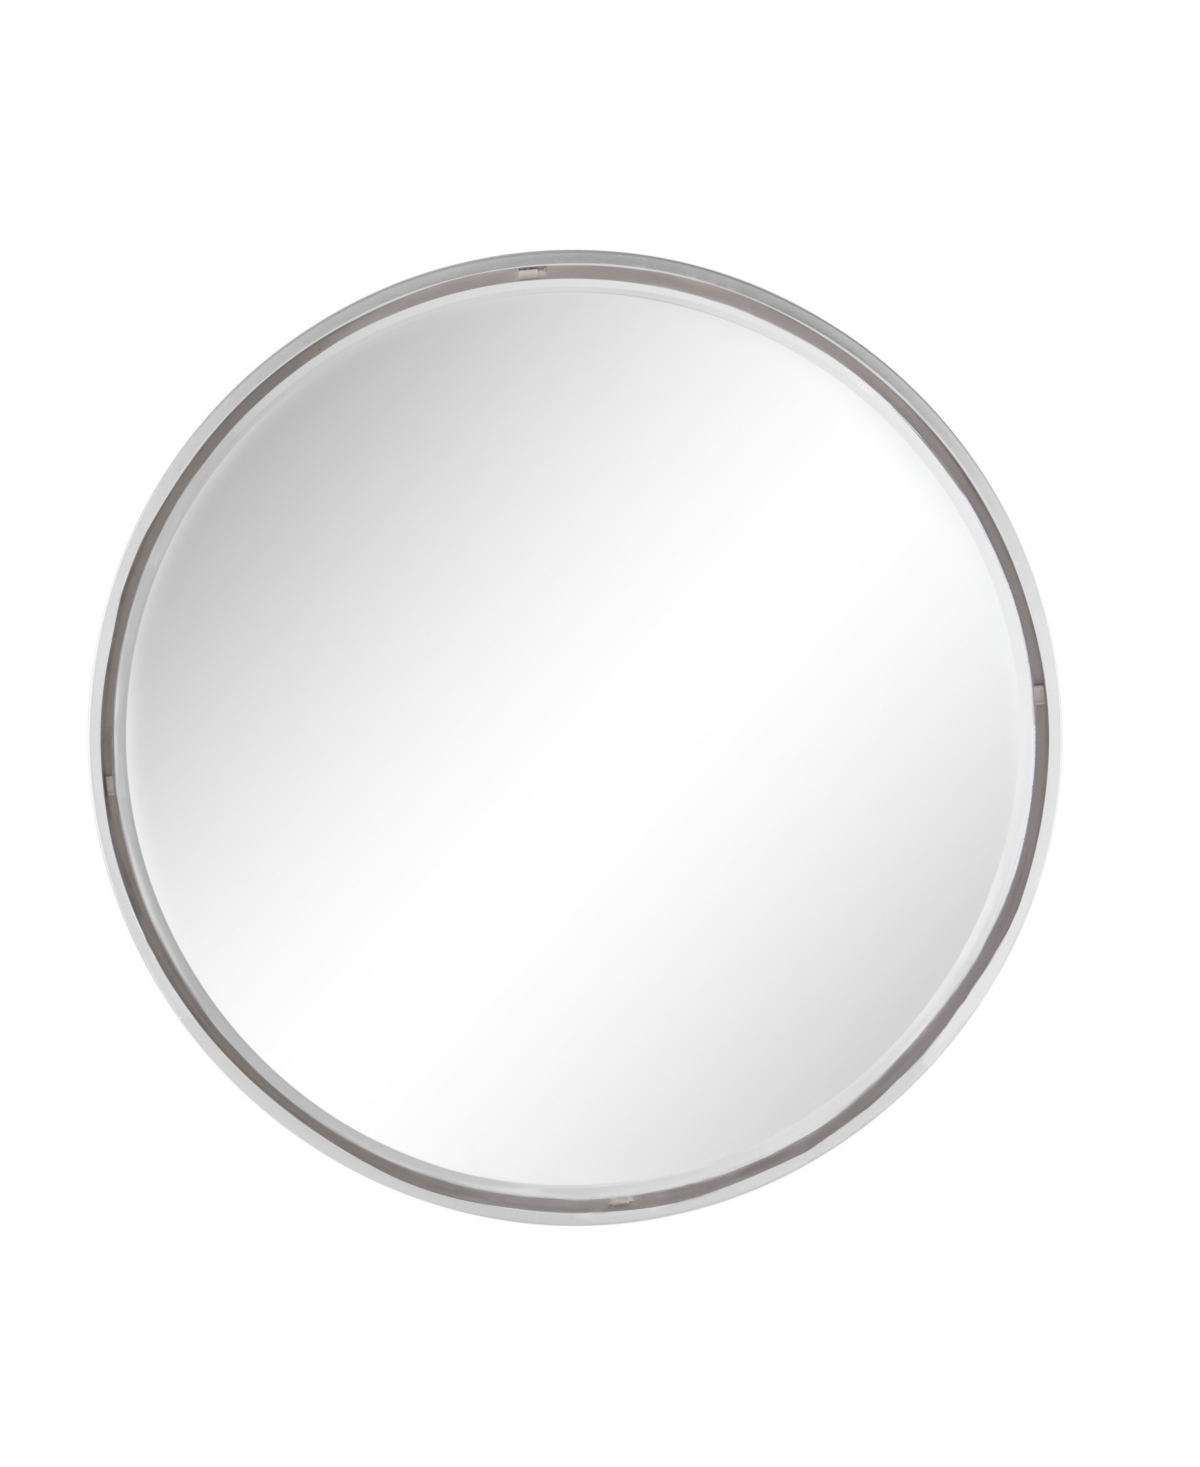 Large Round Contemporary Wall Mirror In Metallic Frame - Gray